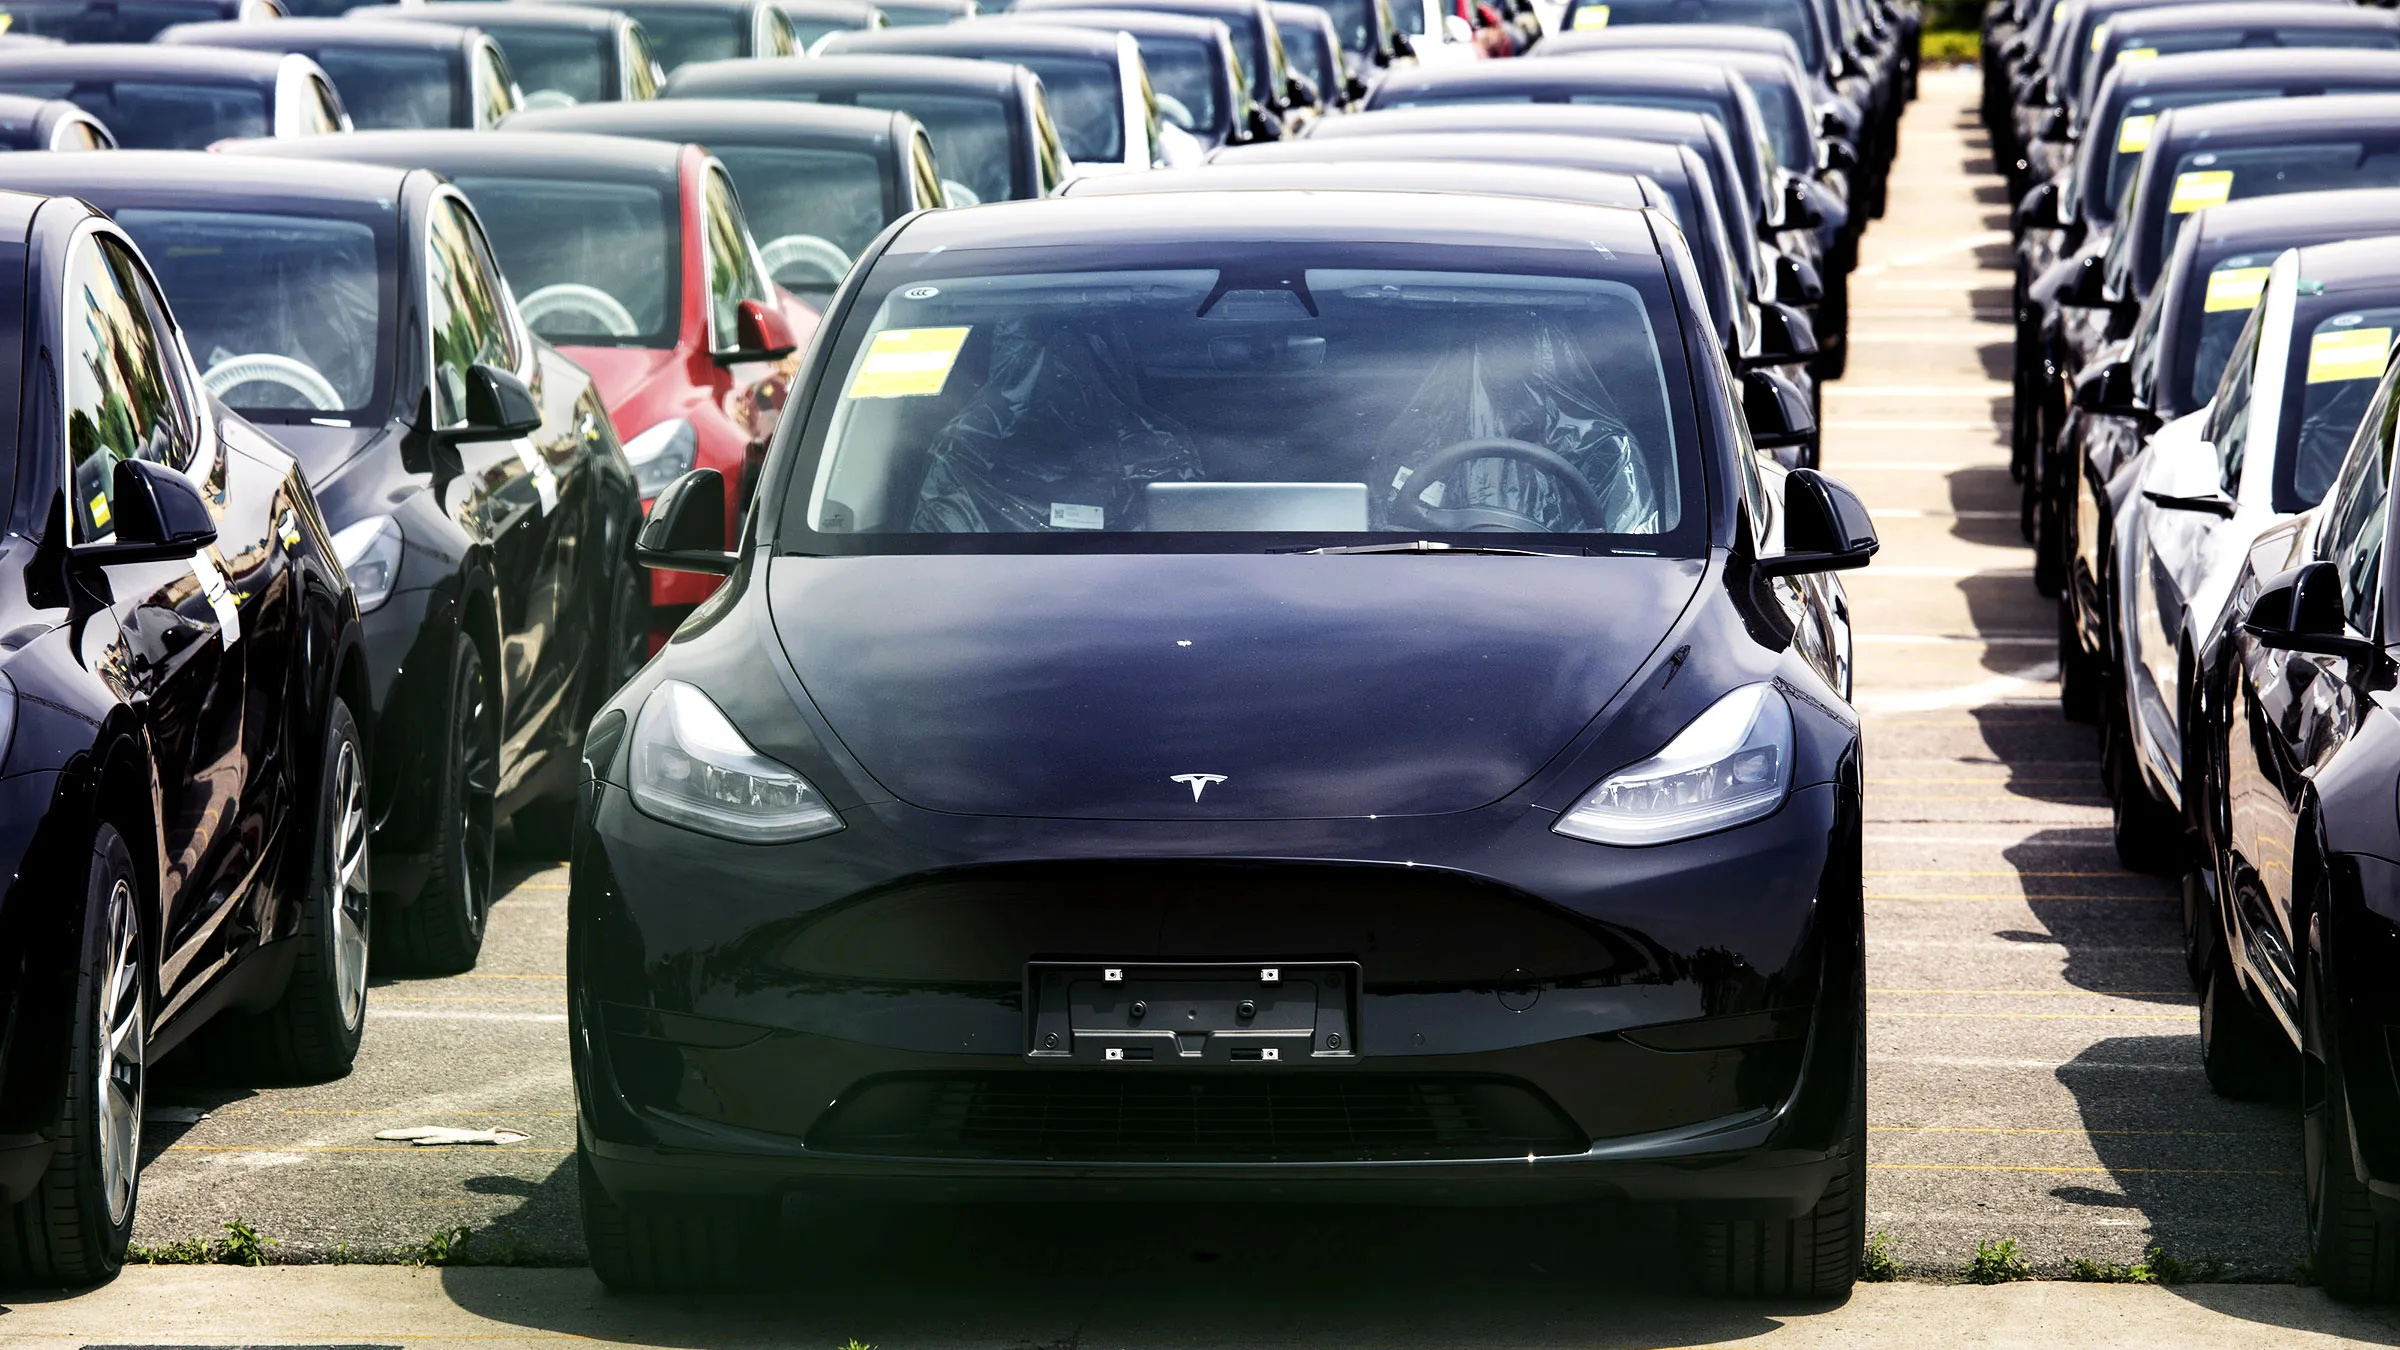 Tesla's pivot raises questions for EV buyers and Biden's policies (Credits: Wired)